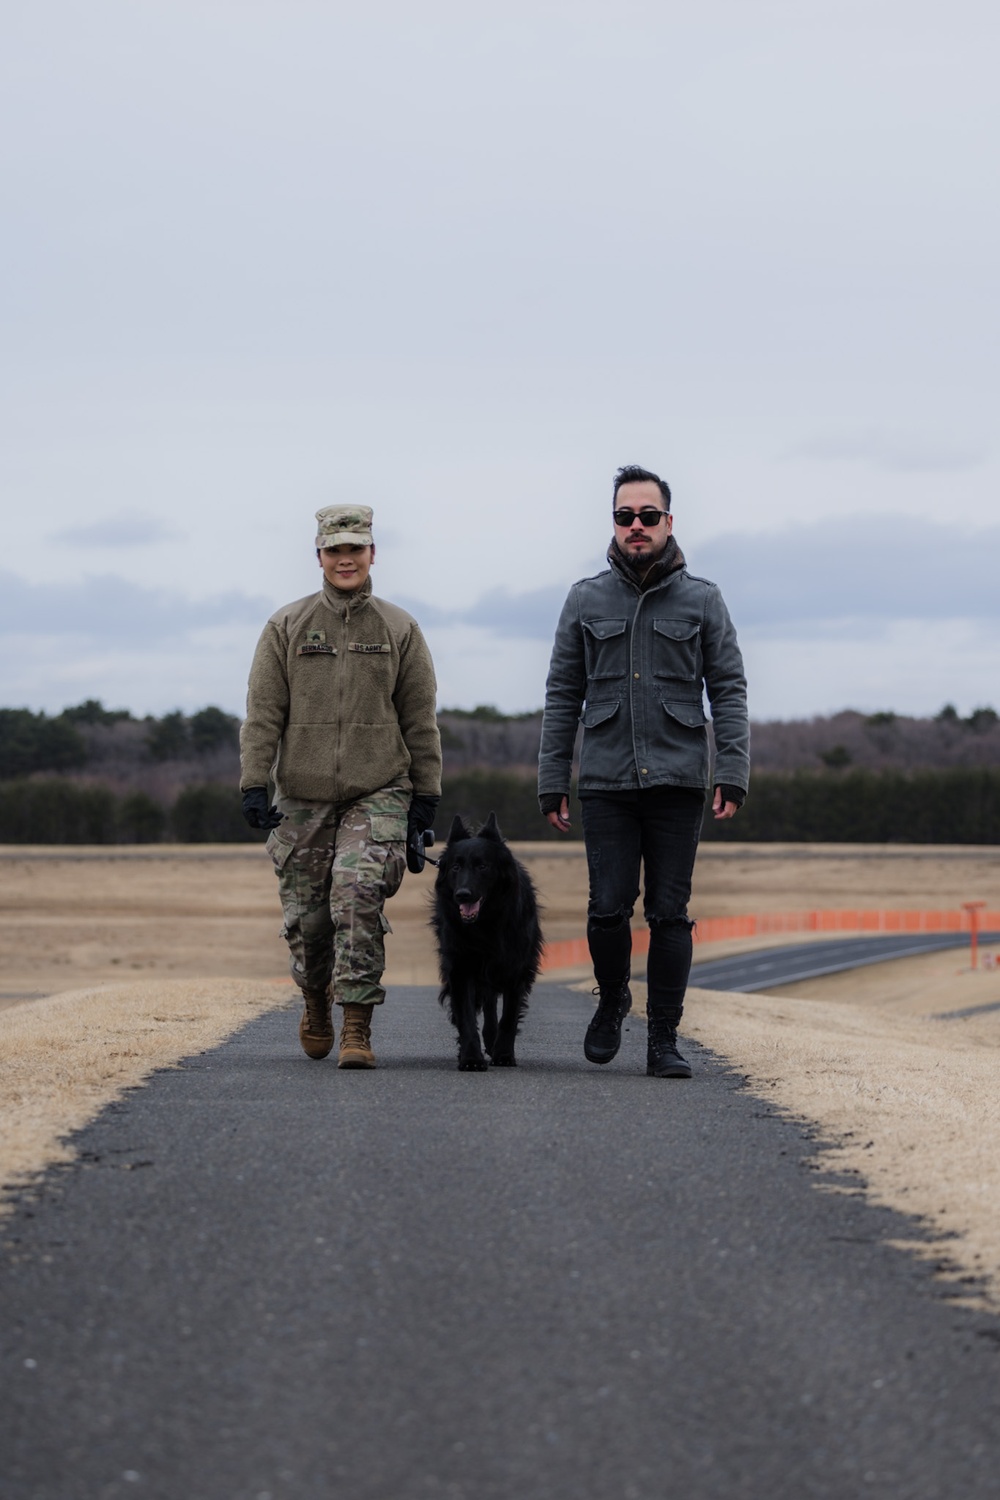 From Life Saving to Life changing: Honoring all K9 Veterans Through the Story of Cento